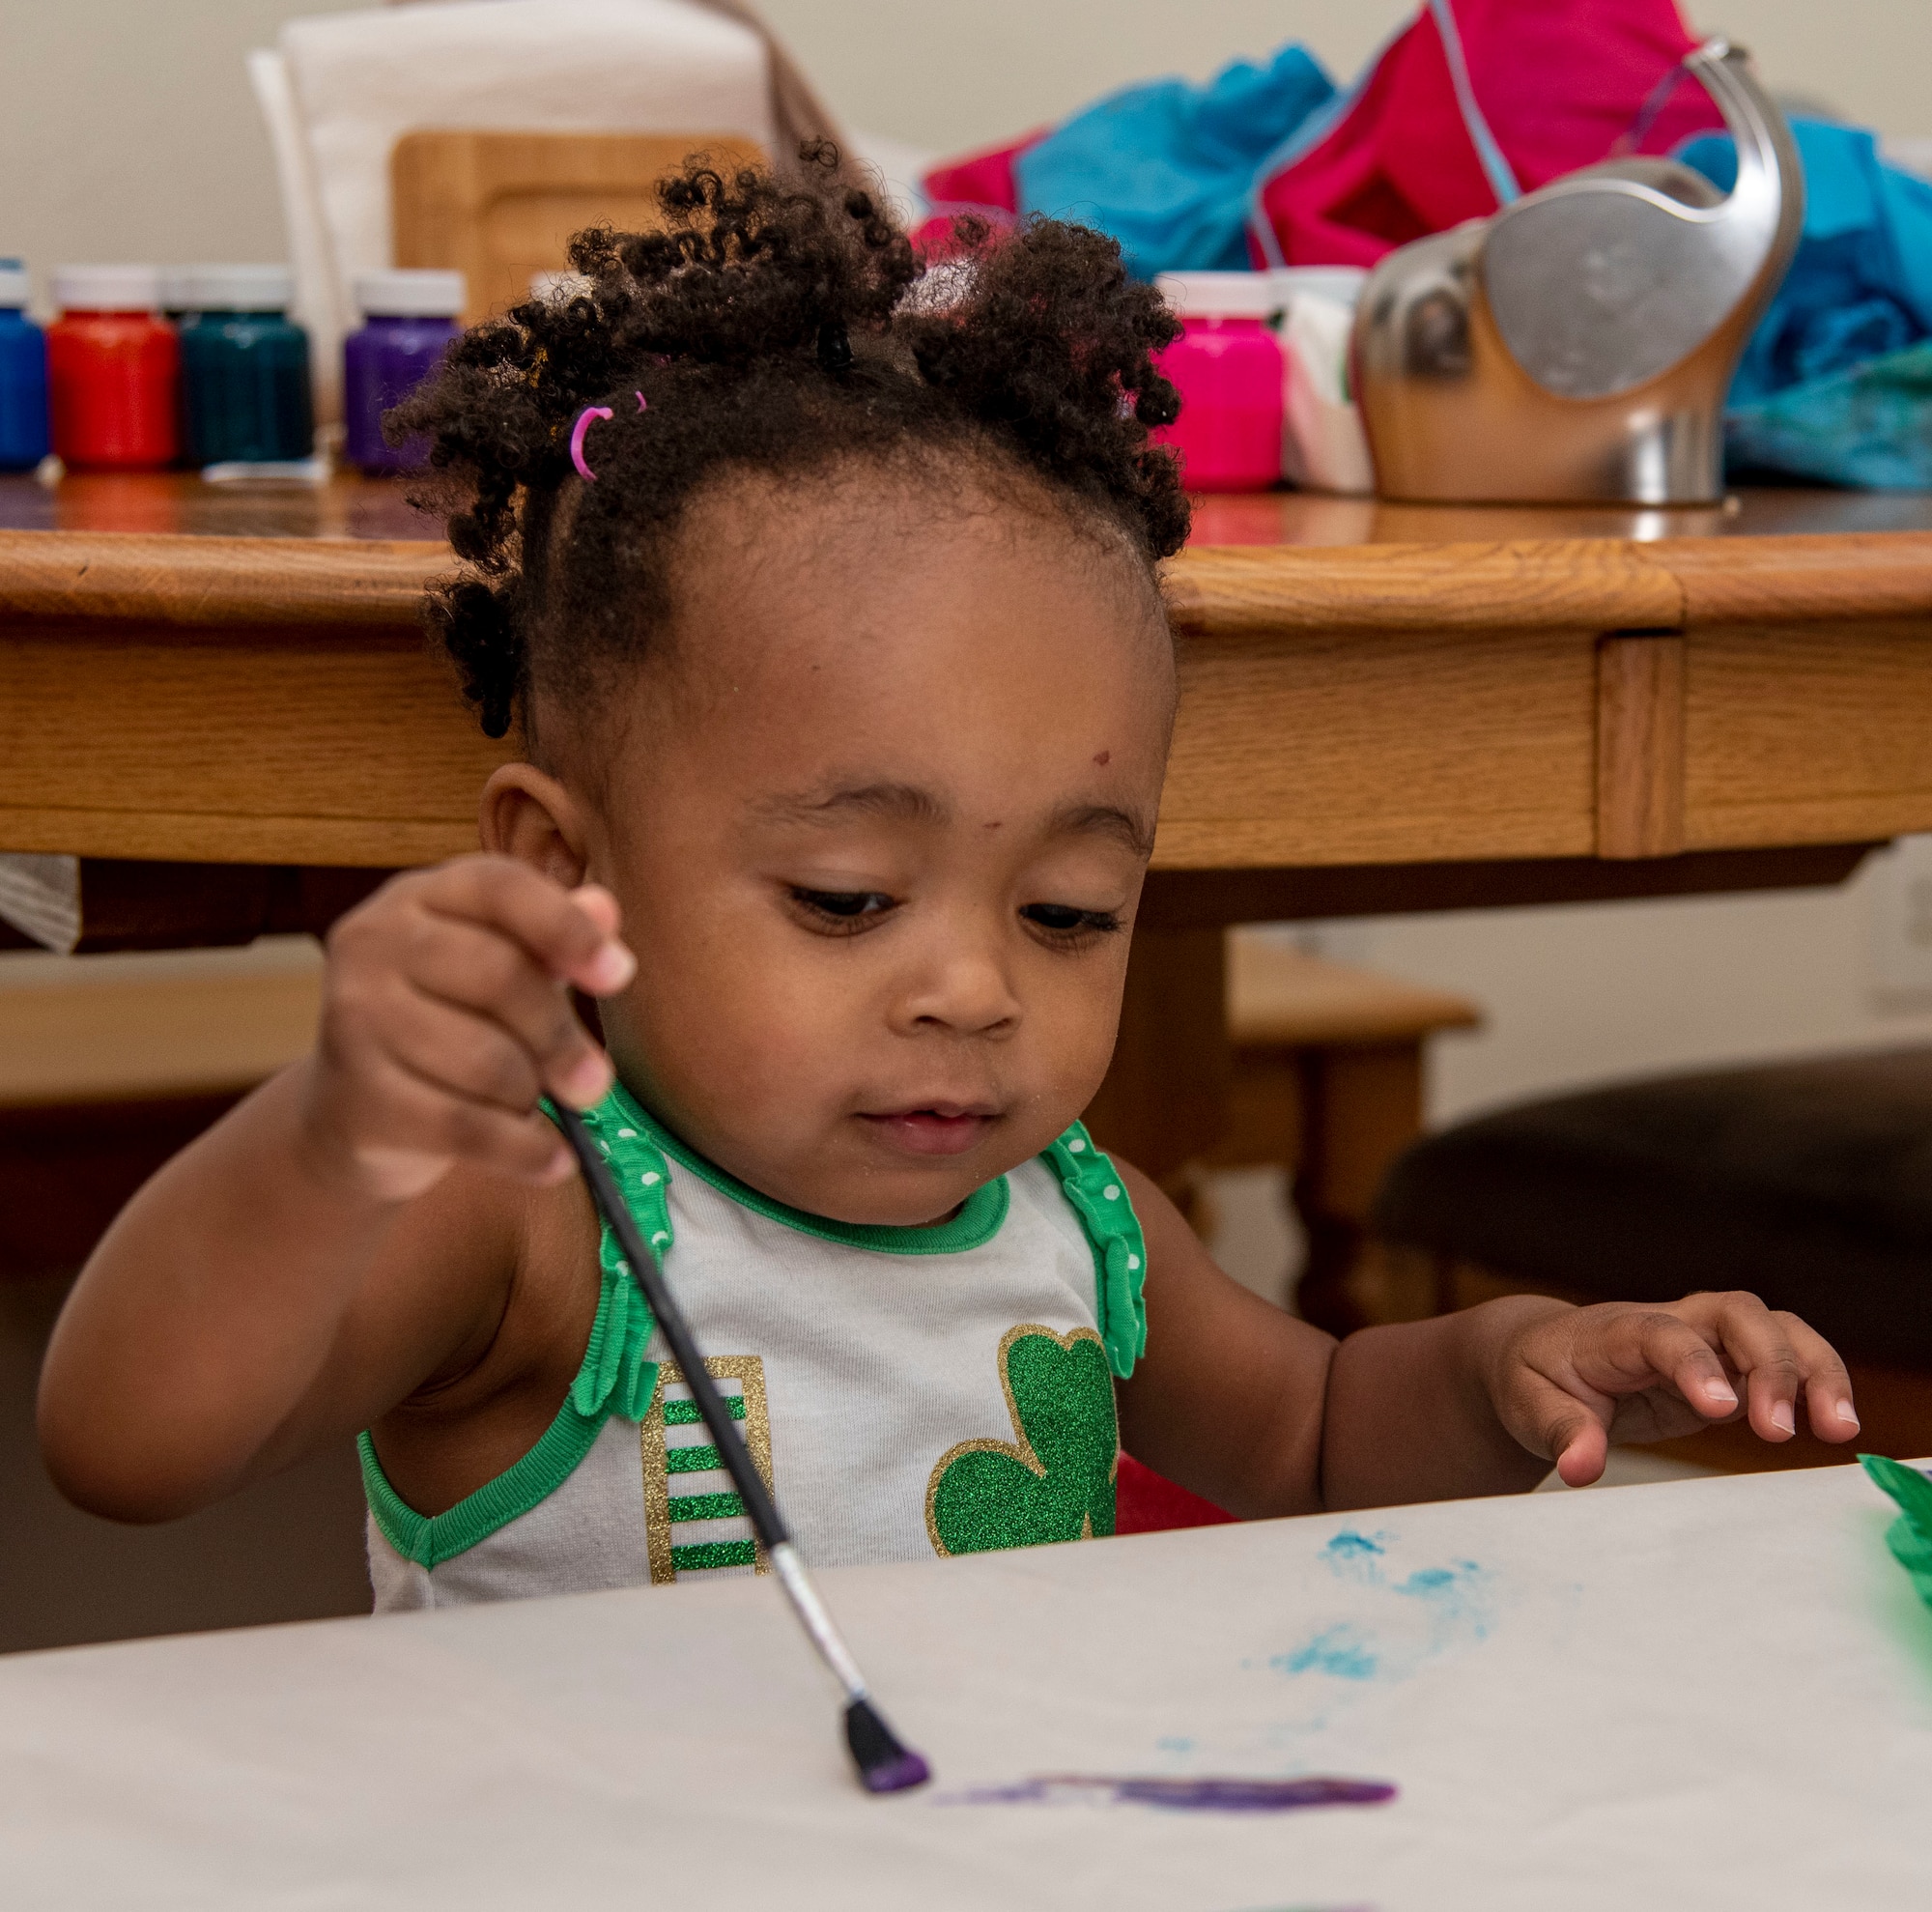 Amani Bailey, daughter of Tech. Sgt. Justin Bailey, 436th Aerial Port Squadron noncommissioned officer in charge of passenger services, paints as part of the Family Child Care program on Dover Air Force Base, Delaware, July 20, 2021. The FCC program offers an alternate option to the Child Development Center or Youth Center on base, providing in-home care for infants through school-aged children. (U.S. Air Force photo by Tech. Sgt. Nicole Leidholm)